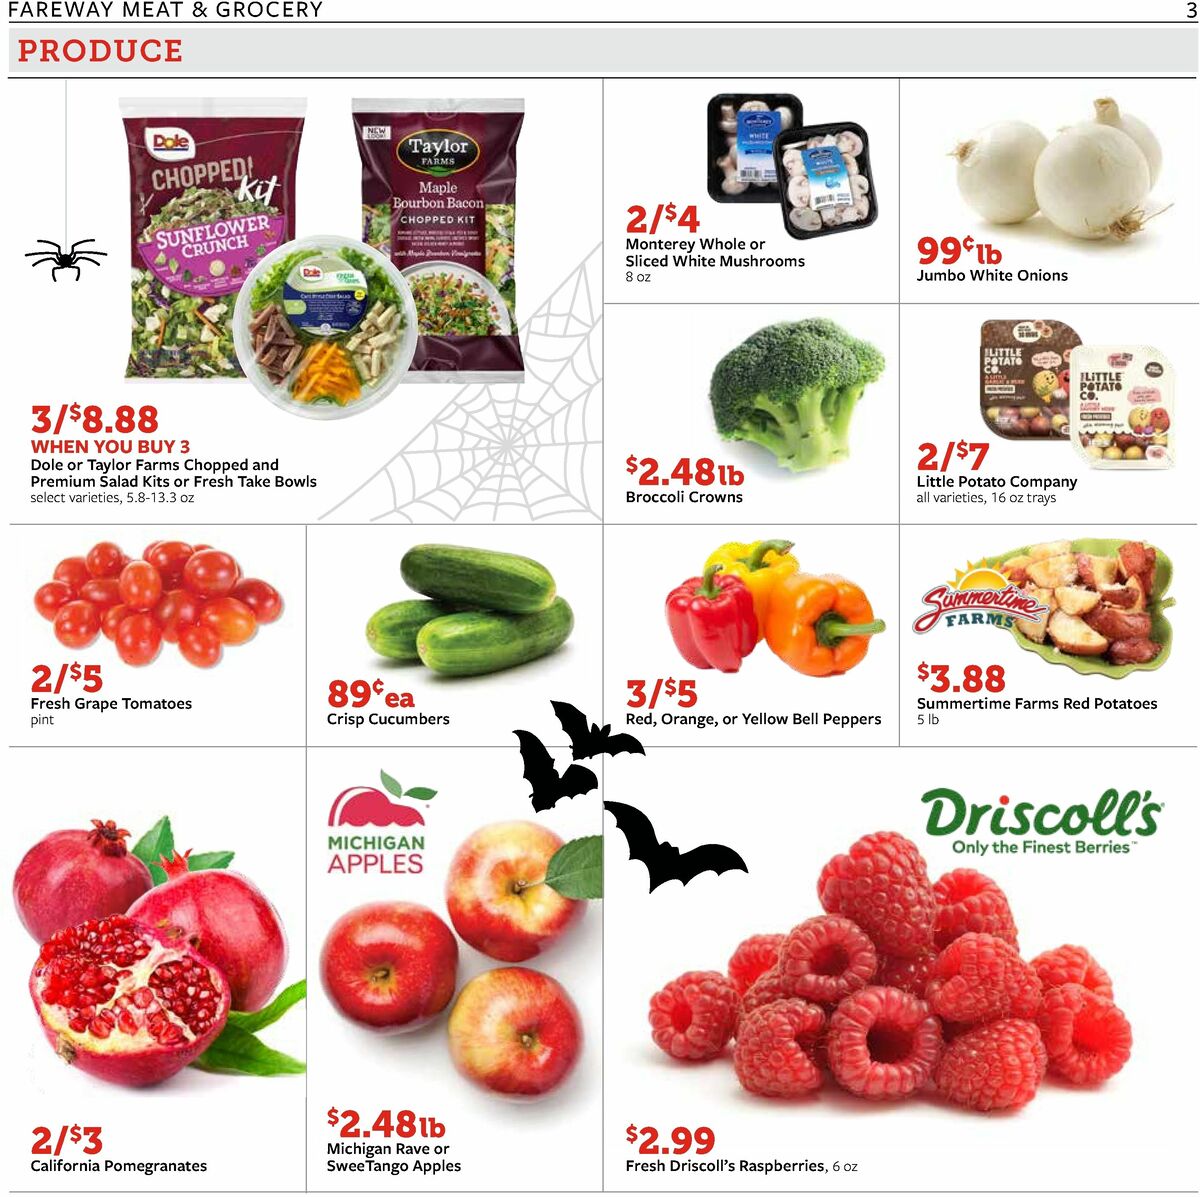 Fareway Weekly Ad from October 23